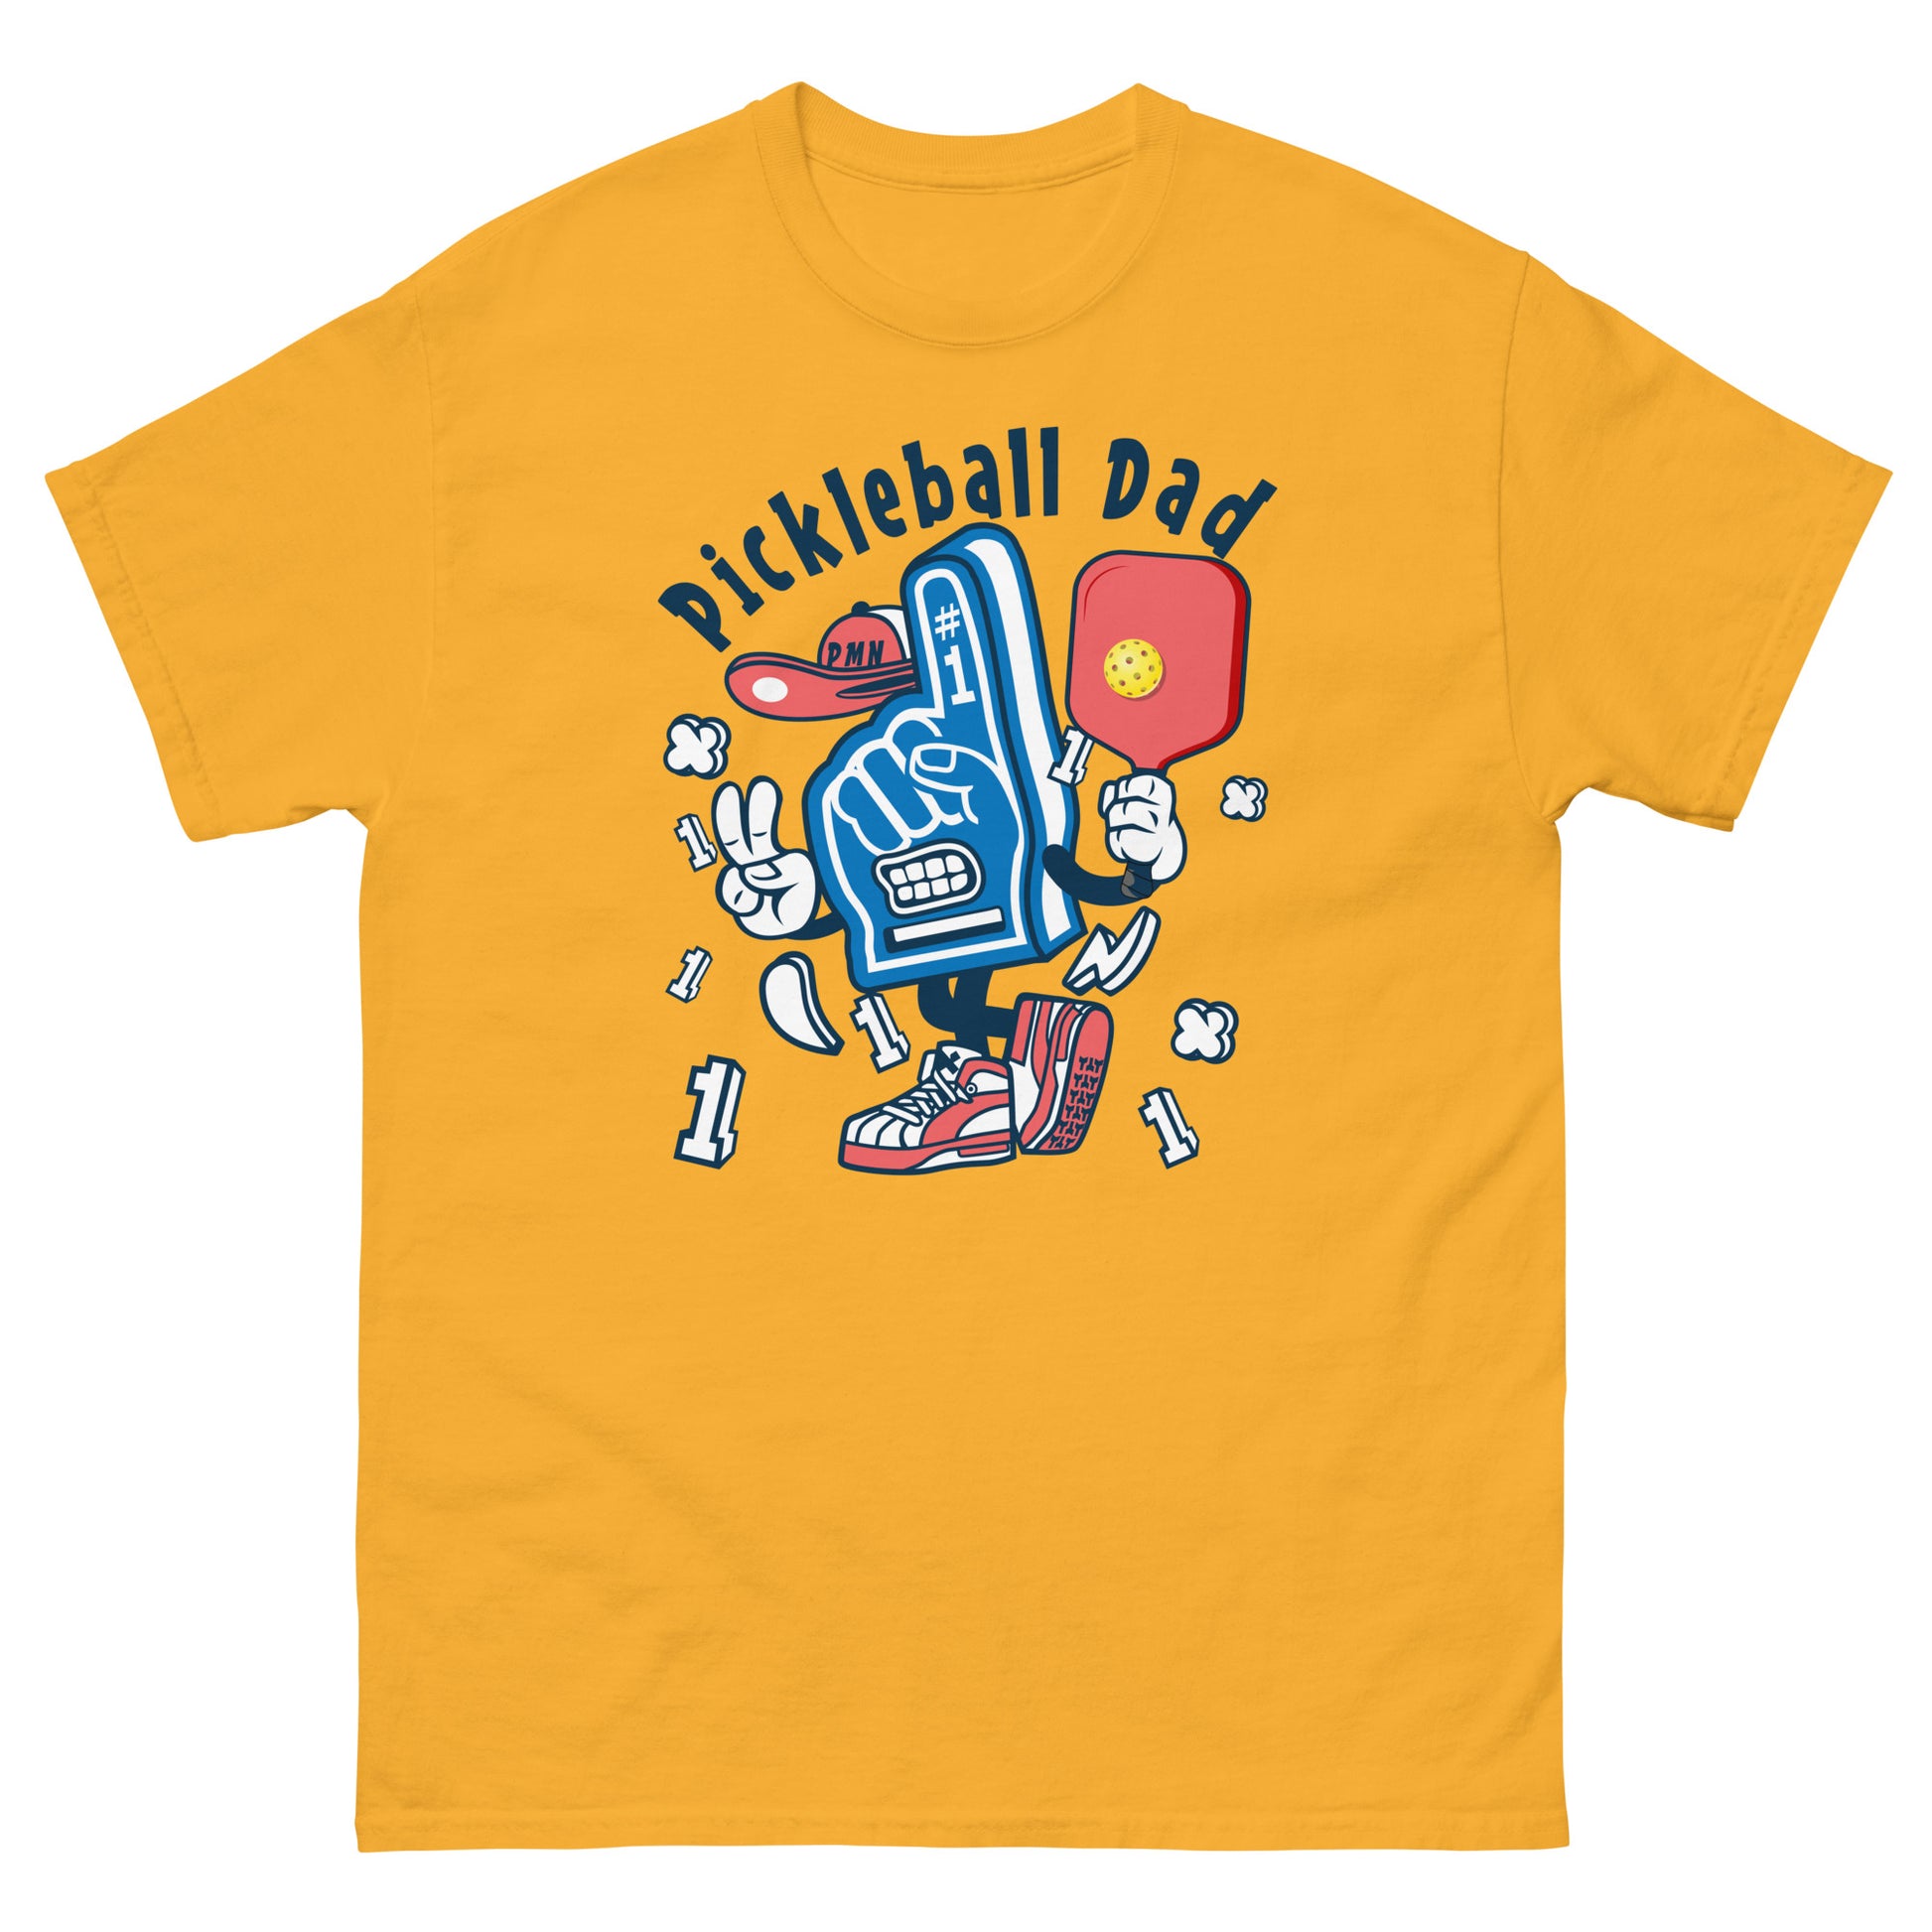 Retro Pickleball Pun: "Number One Pickleball Dad Glove", Father's Day Mens Gold T-Shirt